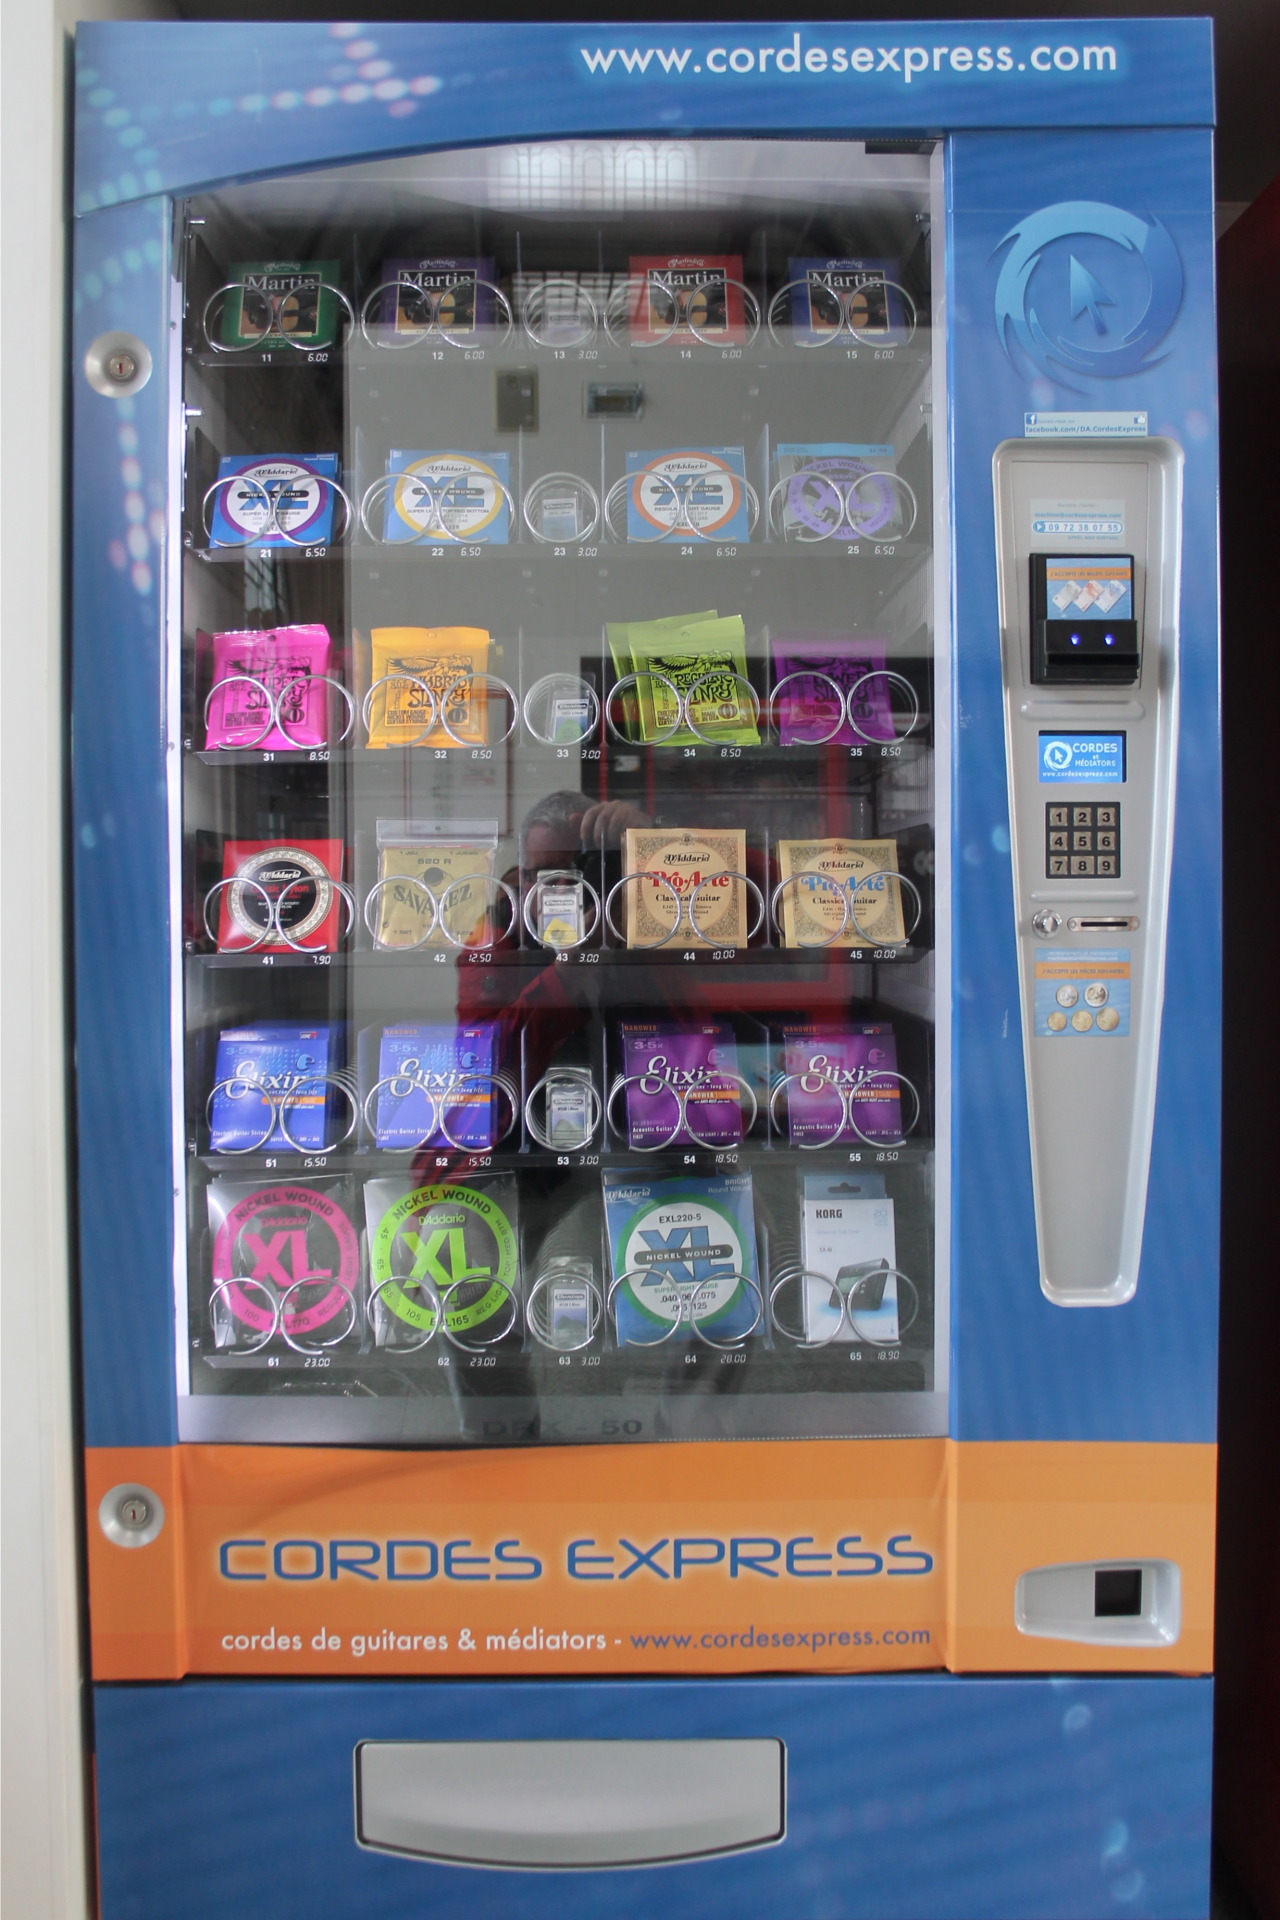 a vending machine, at a train station
but what does this machine sell?
answer: guitar strings